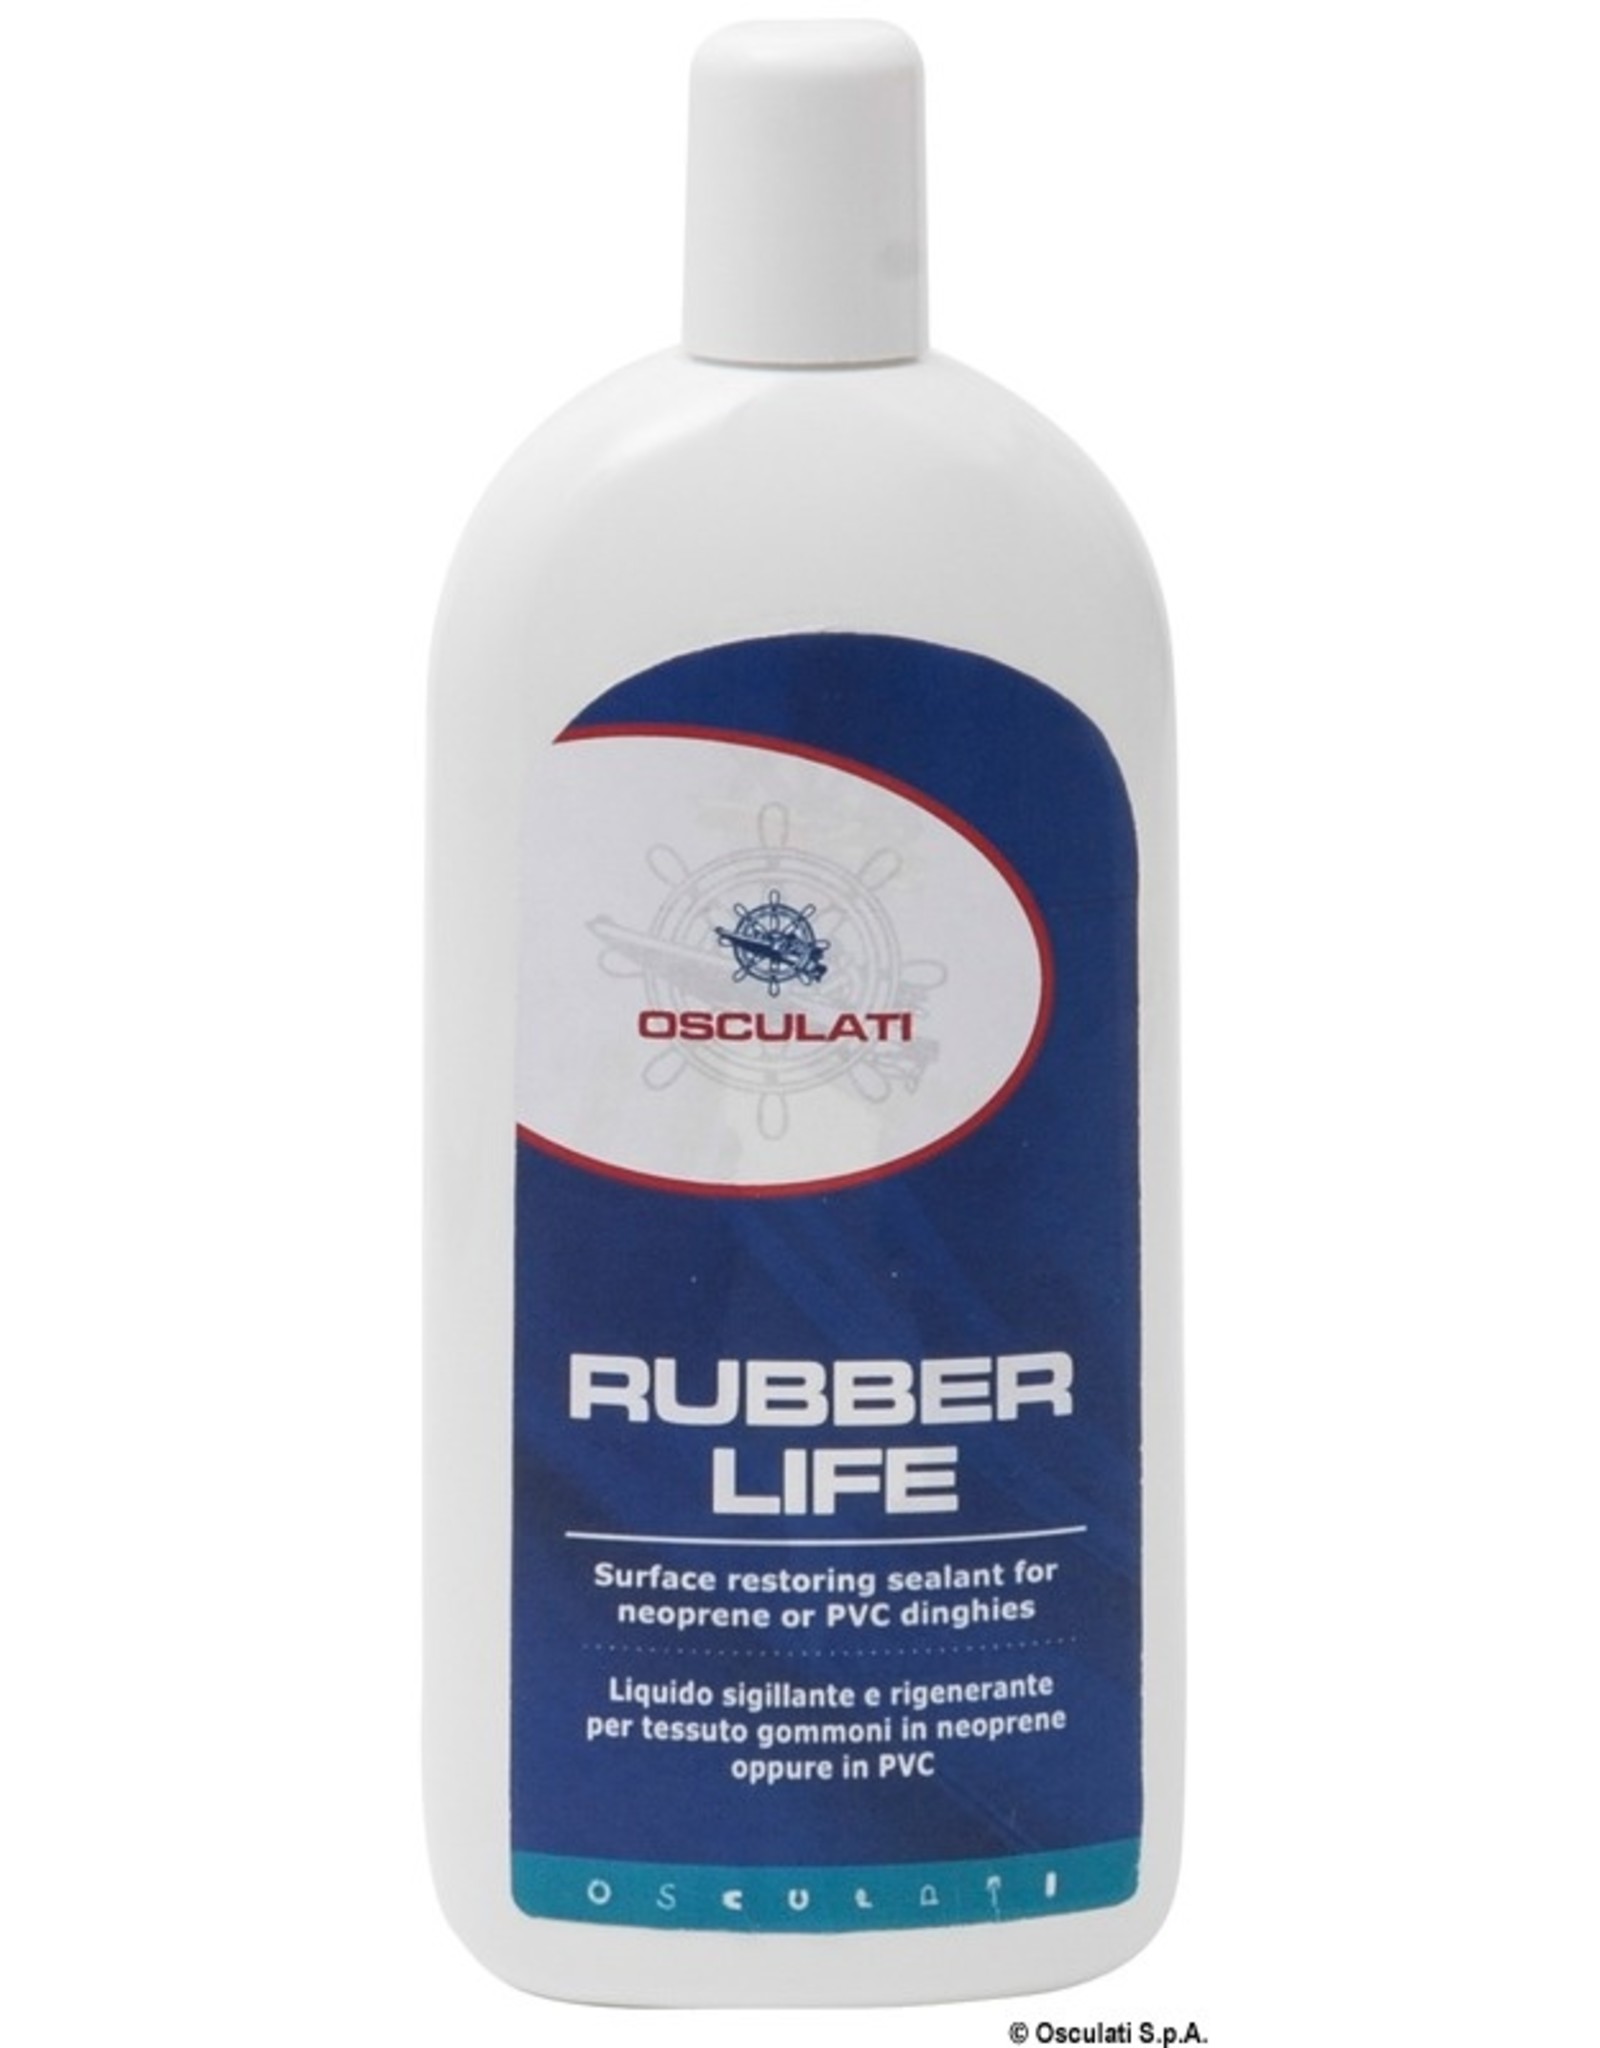 Rubberlife